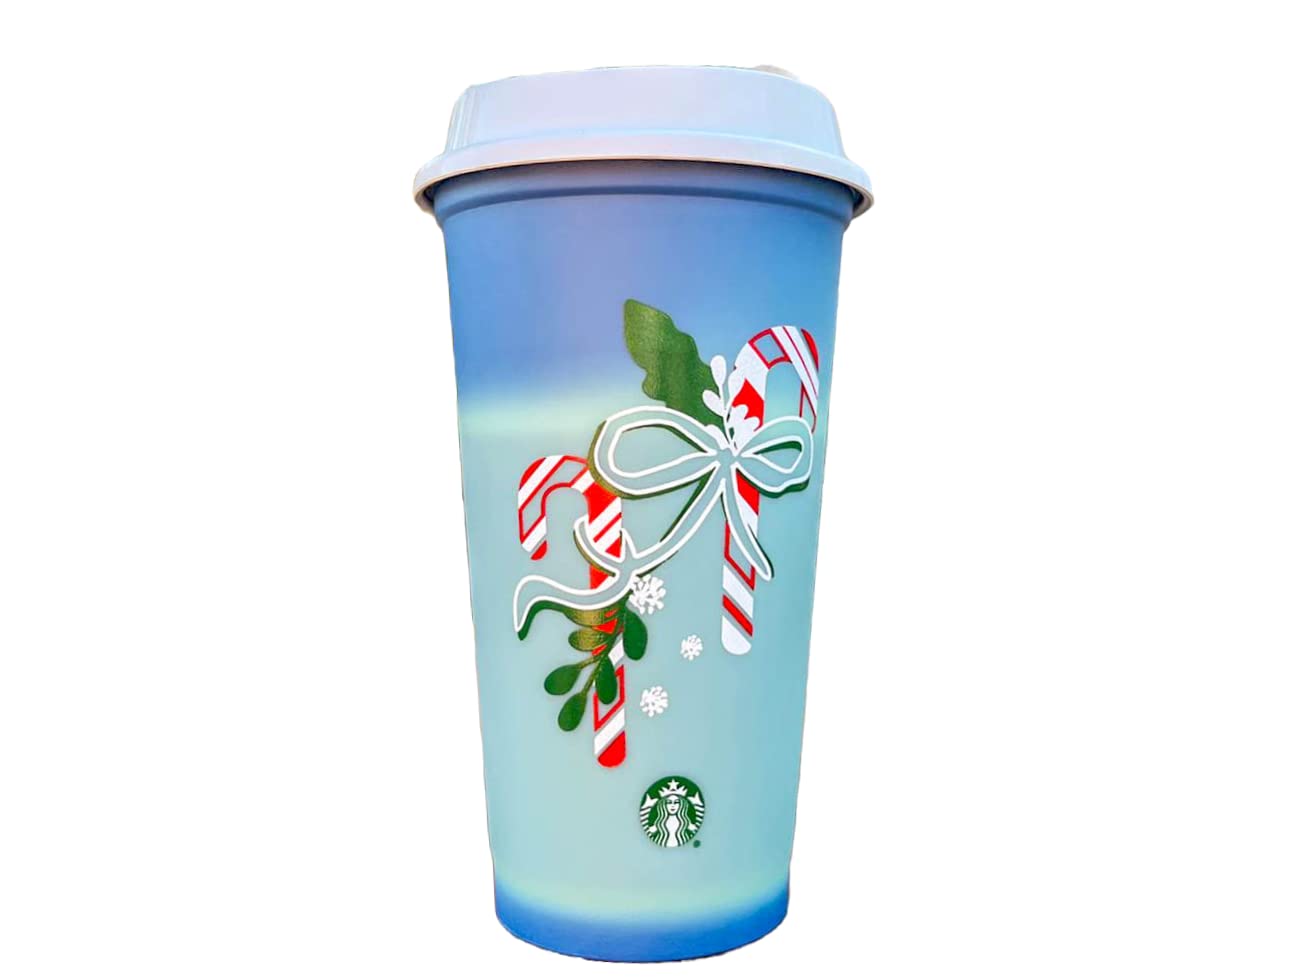 Starbucks Limited Edition Color Changing Candy Cane Reusable Plastic Hot Cups (3)16 oz